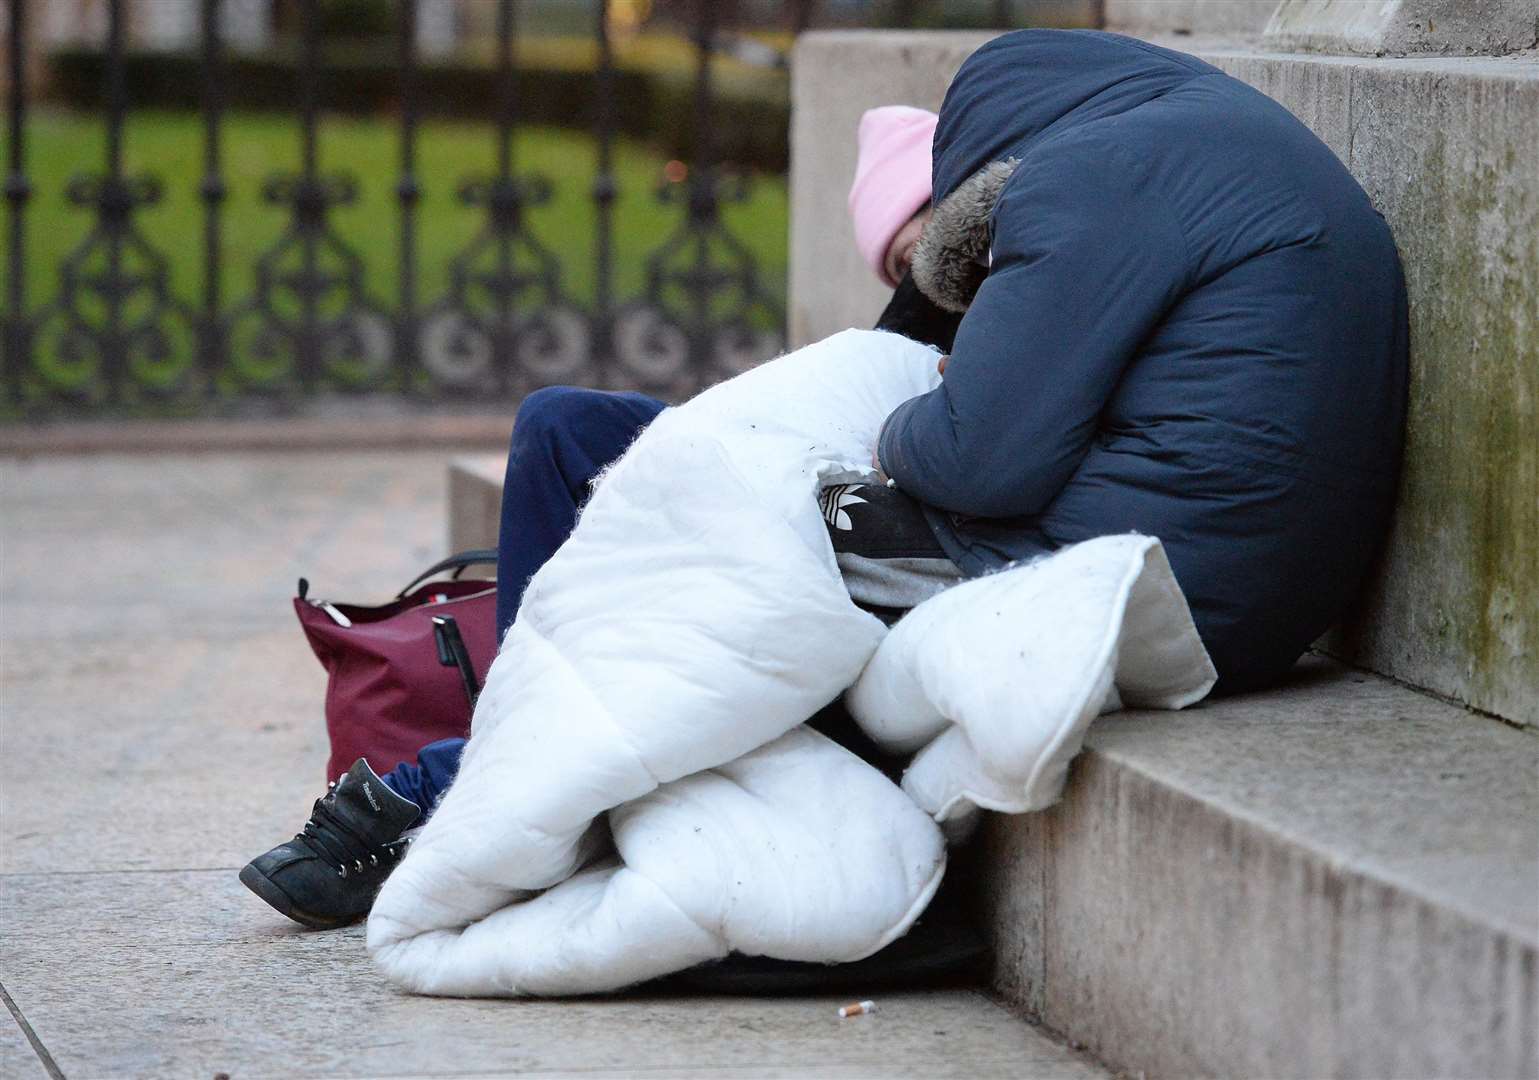 Figures for rough sleeping have more than doubled since 2010 (Nicholas T Ansell/PA)